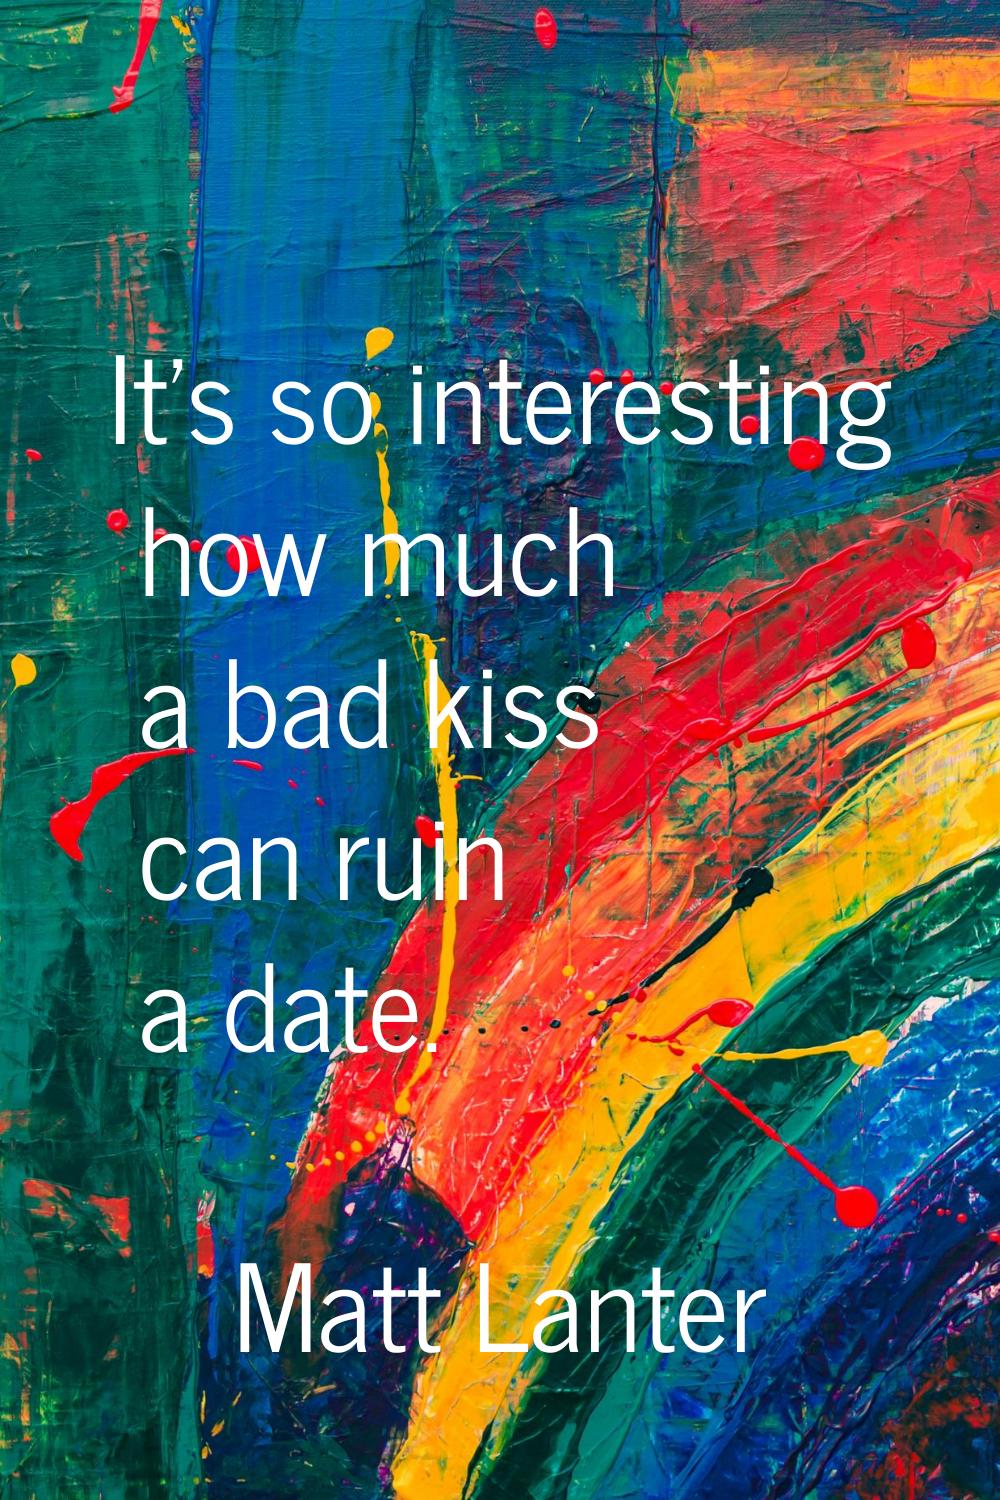 It's so interesting how much a bad kiss can ruin a date.